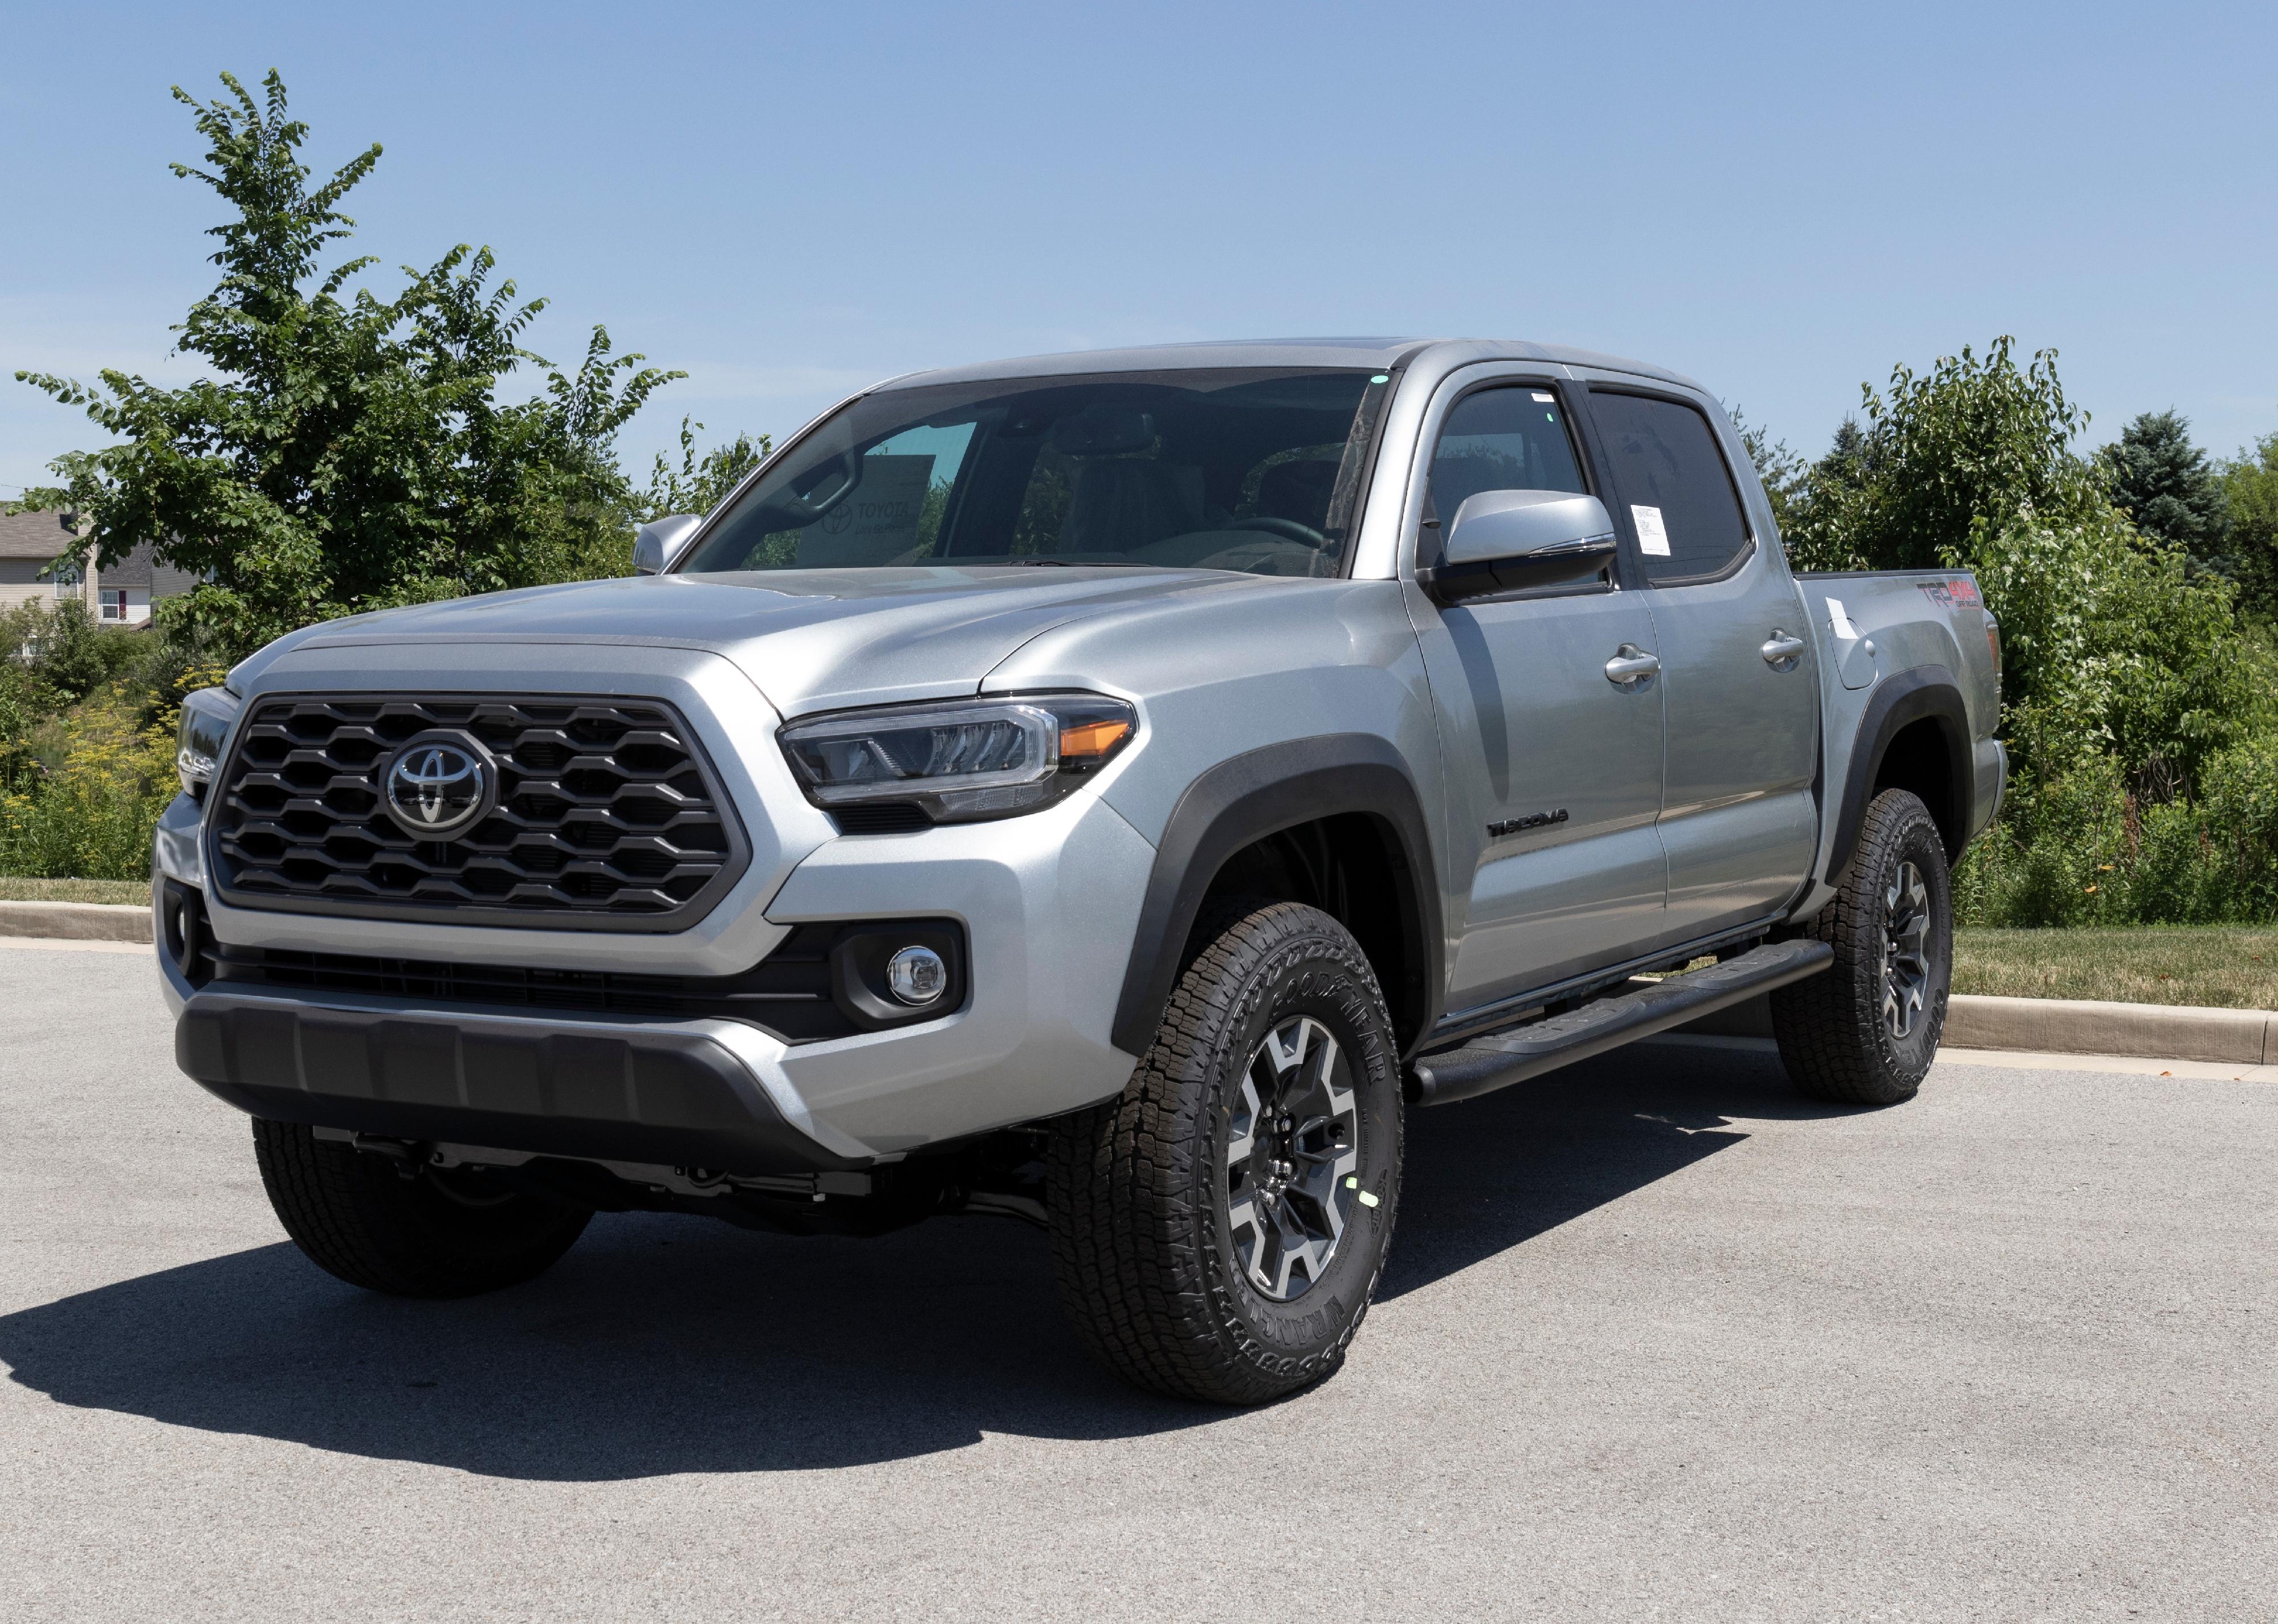 Silver Toyota Tacoma on display in parking lot.